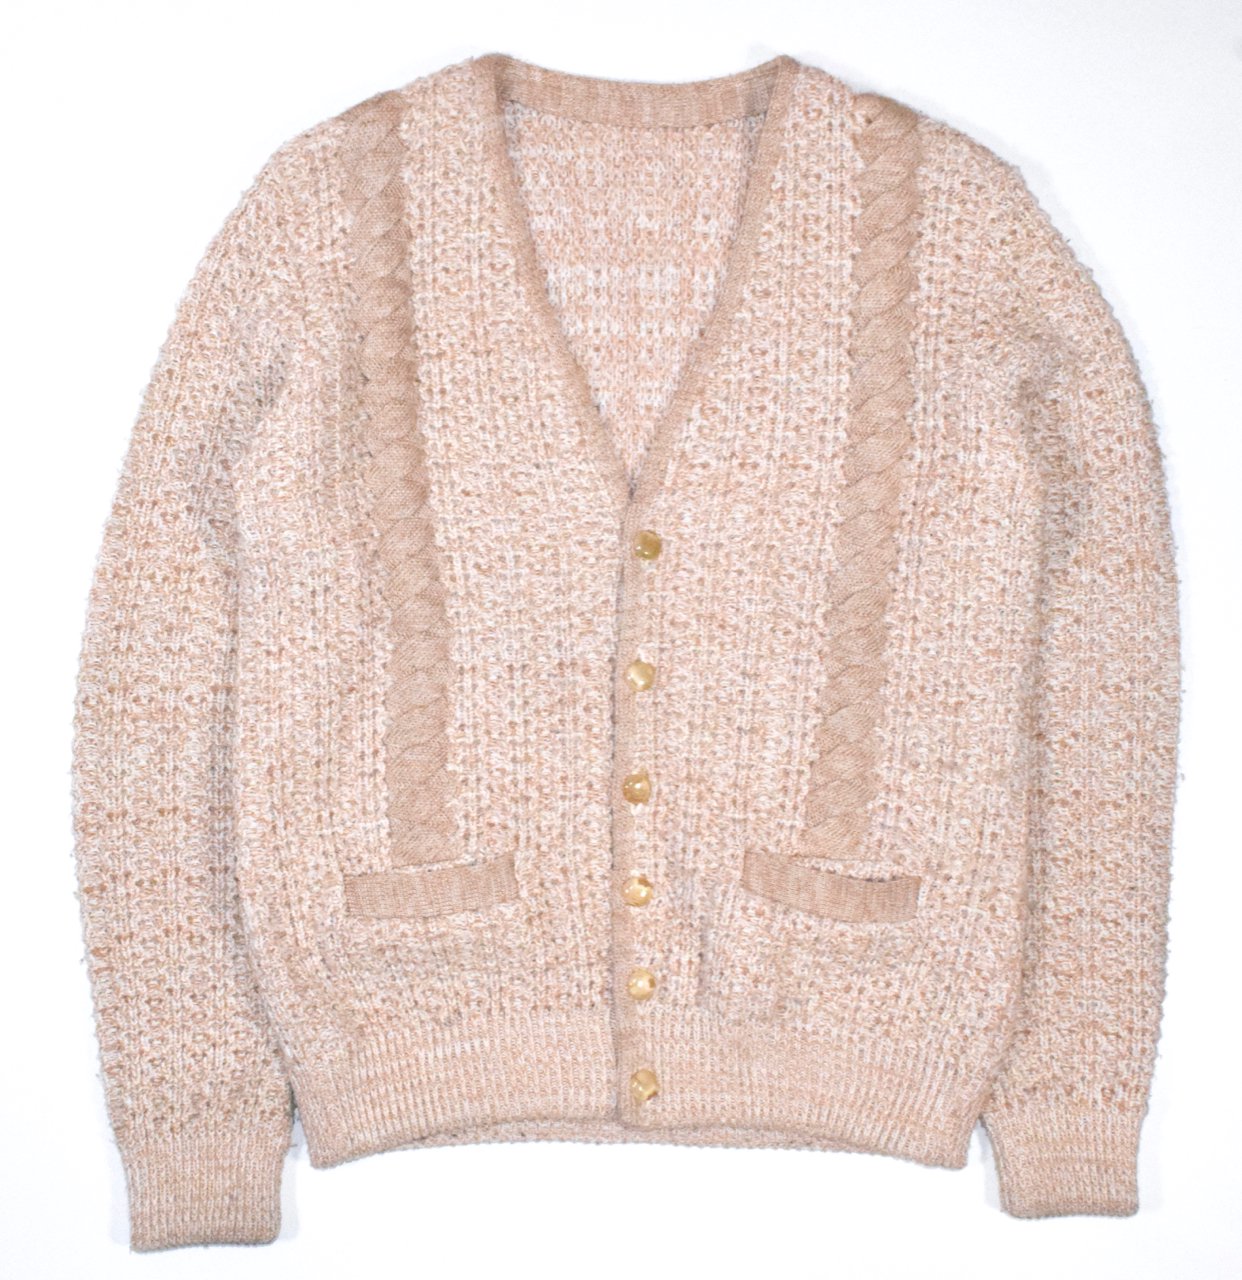 6070s UNKNOWN Vintage knit cardigan ML MADE IN CANADA?